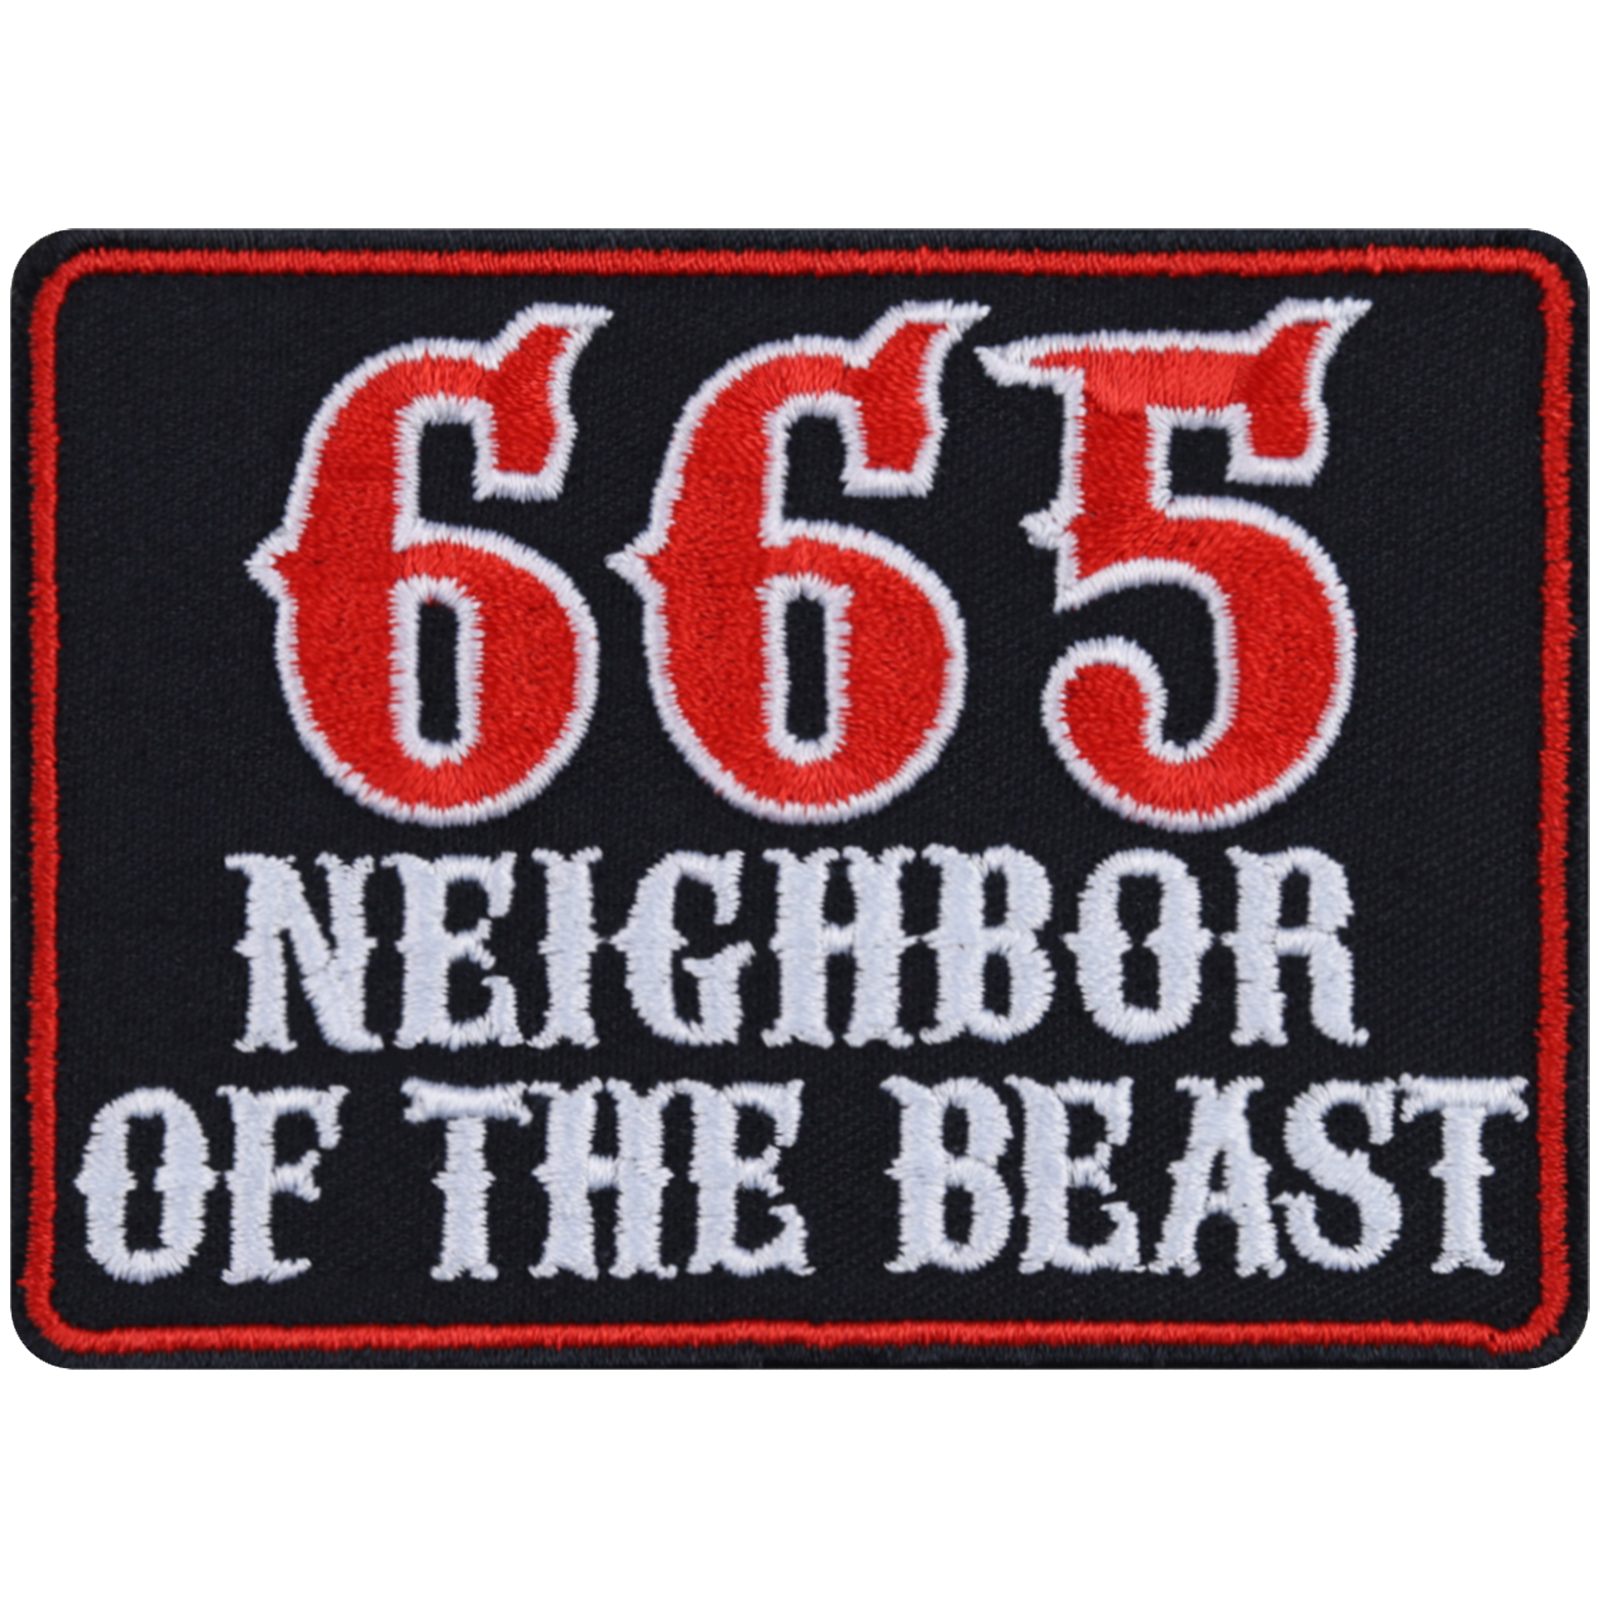 665 neighbor of the beast - Patch